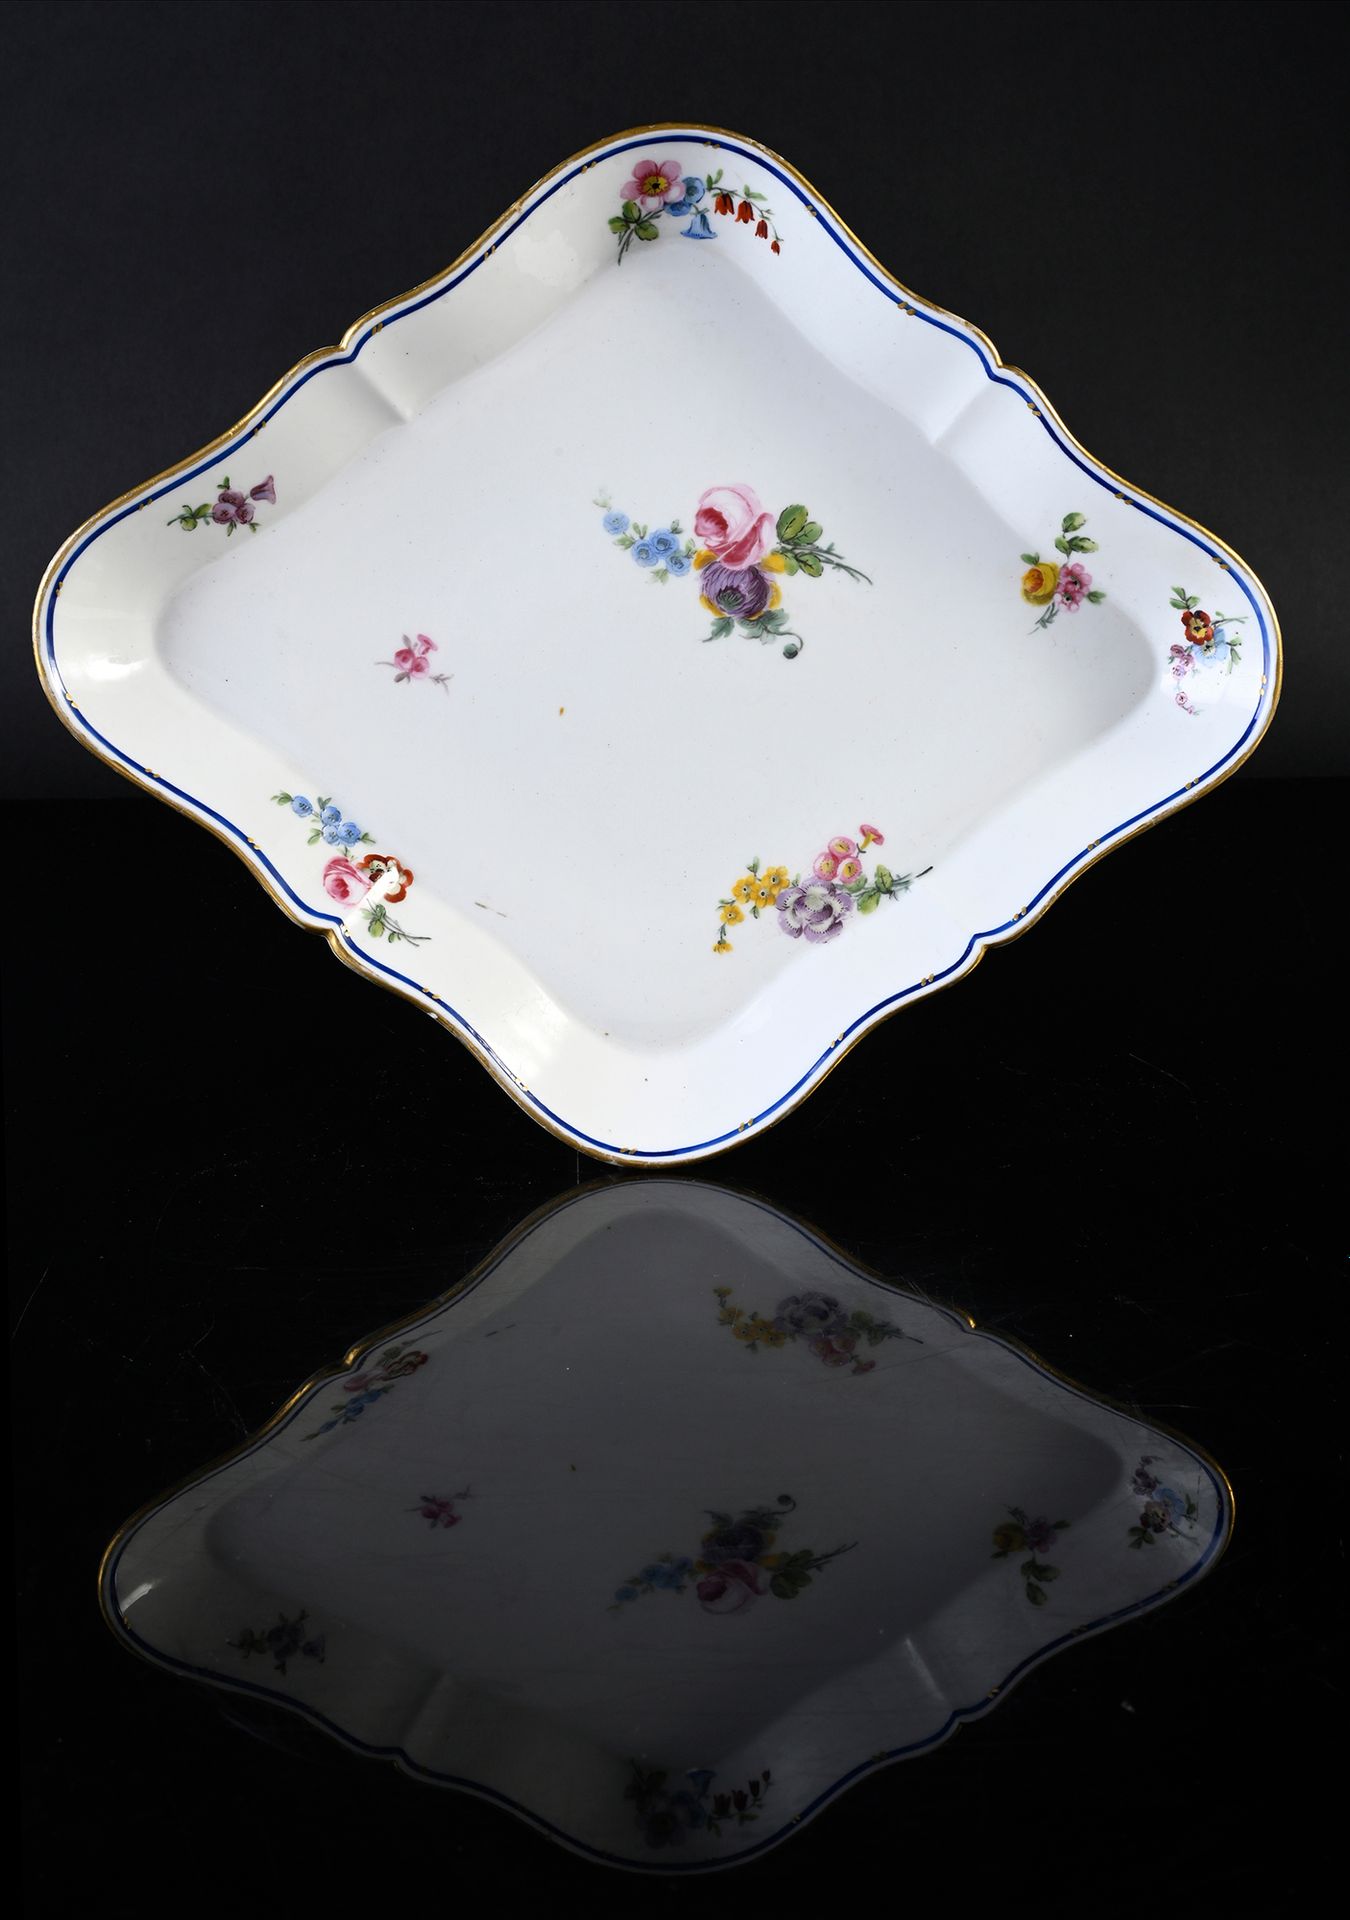 Null Diamond tray in porcelain of
Sèvres porcelain of the 18th century
With poly&hellip;